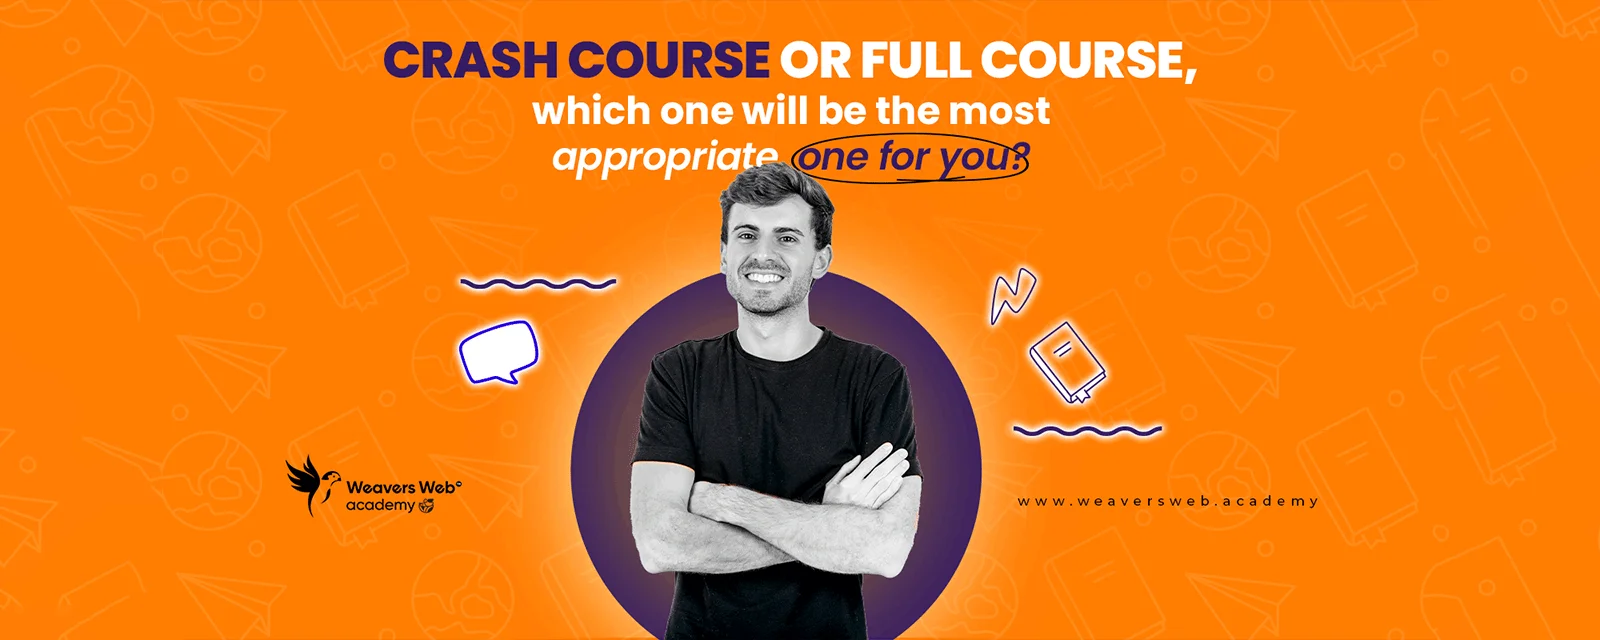 Crash Course Or Full Course: Which One Will Be The Most Appropriate For You?